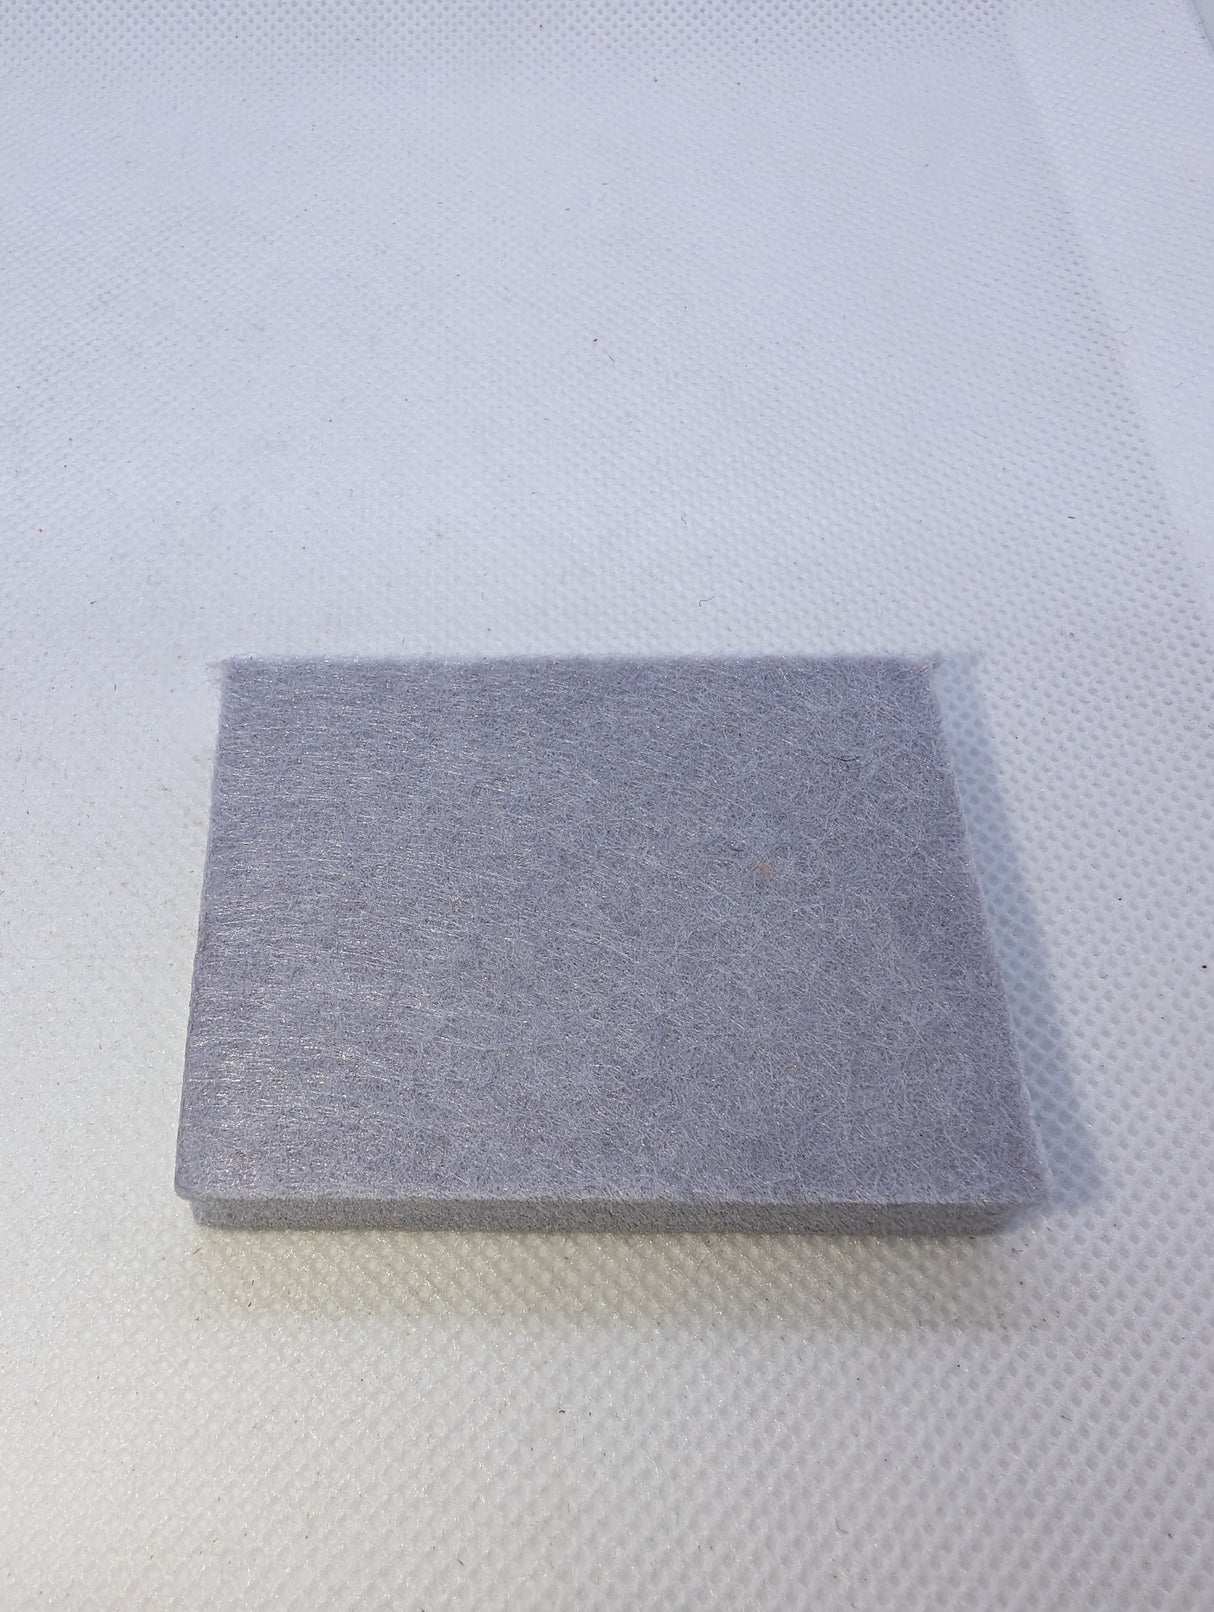 PolyColour Light Grey Pinboard Fire Rated 2440x1220x9mm